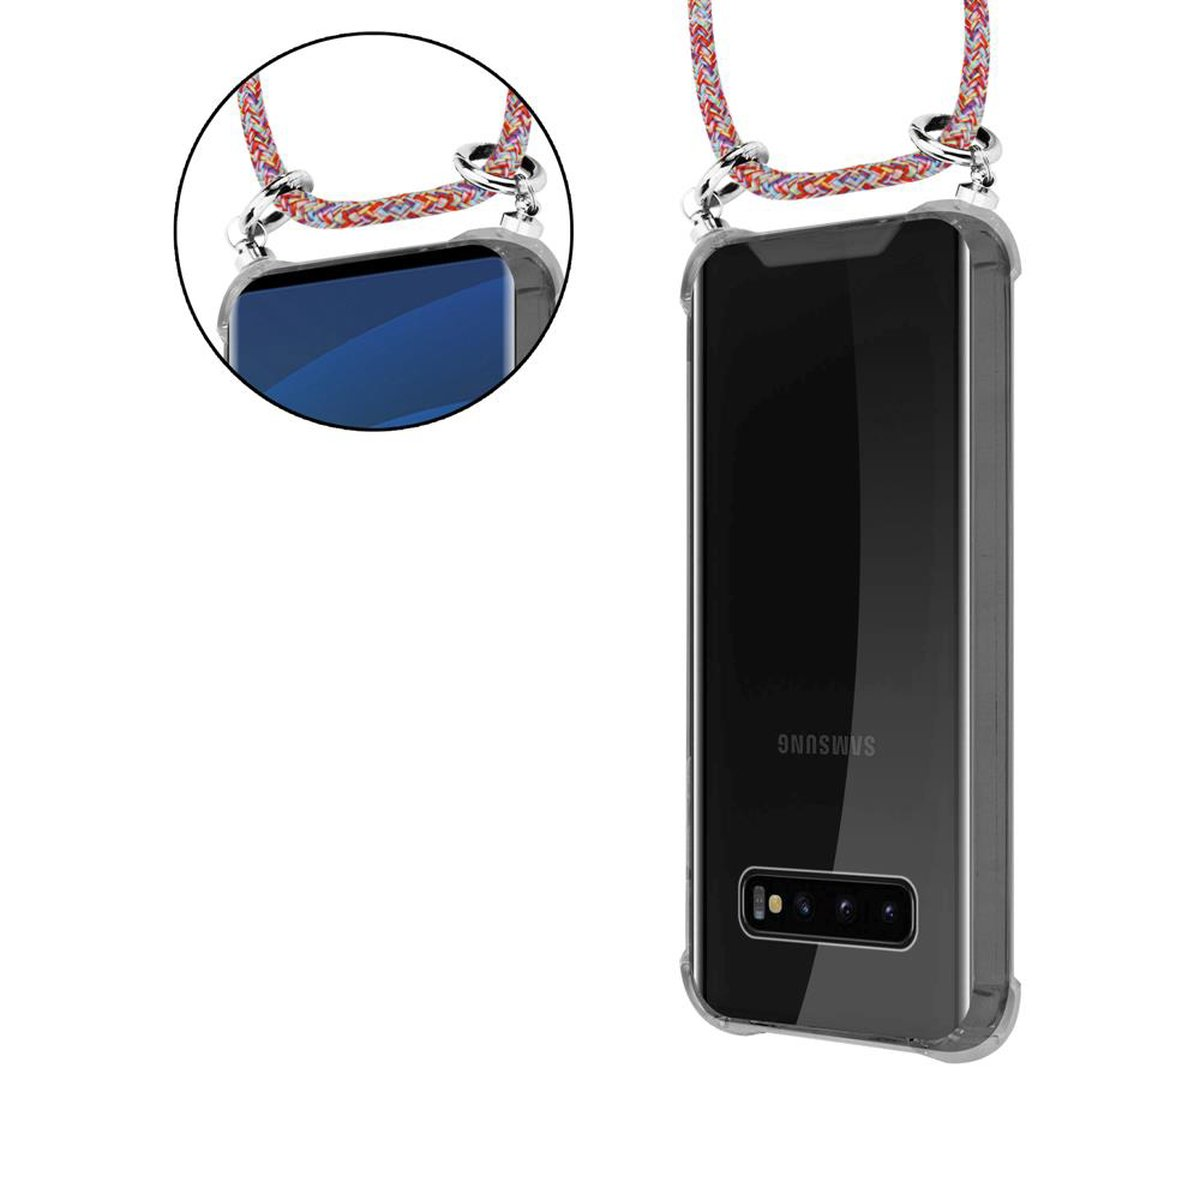 Kette mit Backcover, Handy Silber Band abnehmbarer S10 Galaxy Samsung, PARROT COLORFUL PLUS, Kordel Hülle, und CADORABO Ringen,